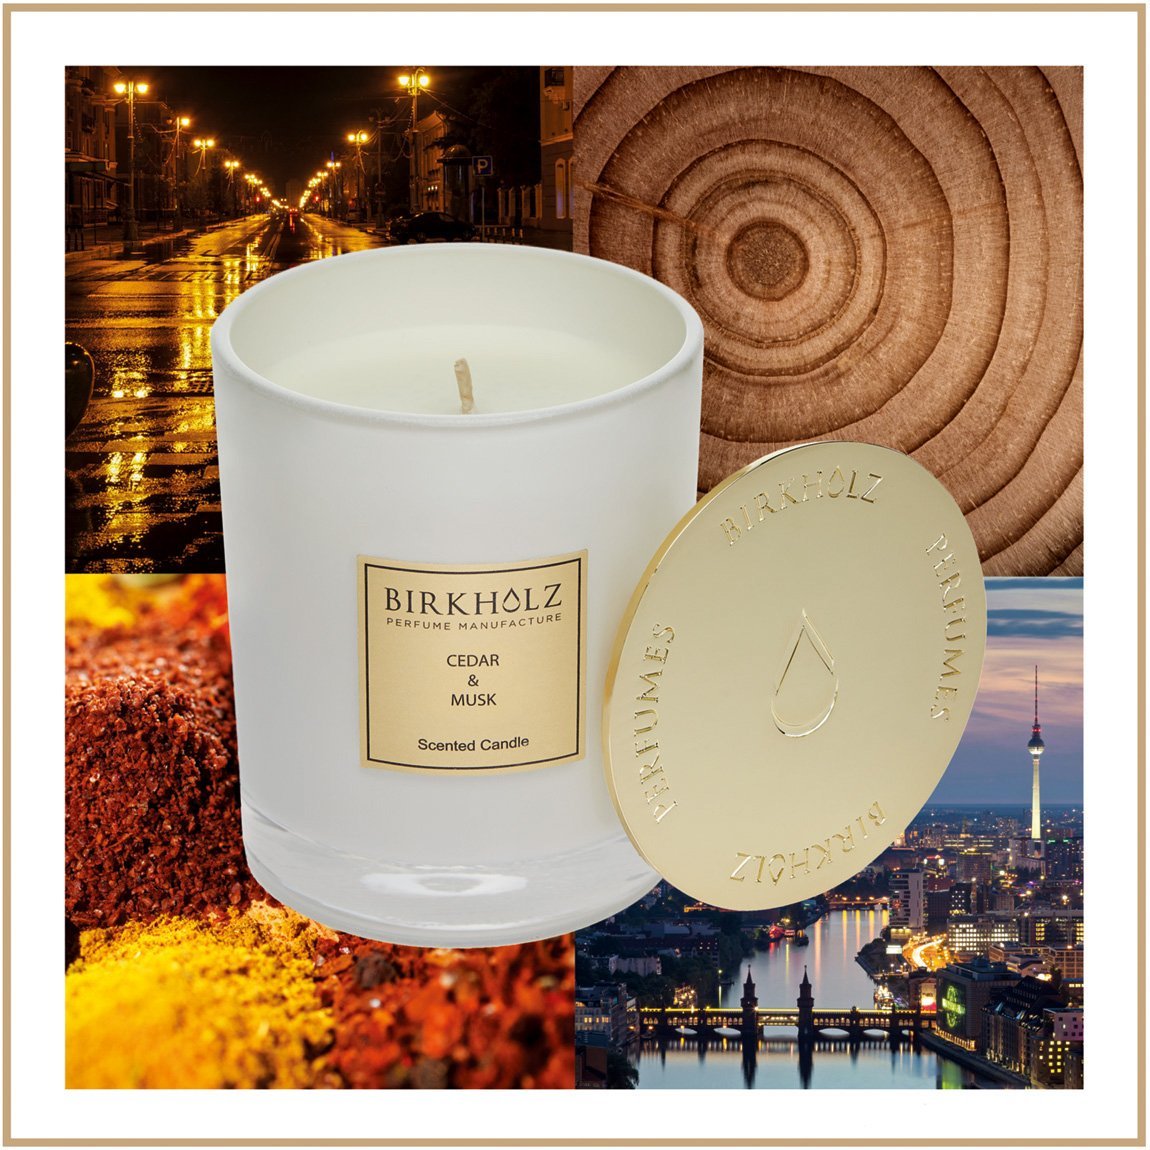 Scented Candle Cedar & Musk - Birkholz Perfume Manufacture